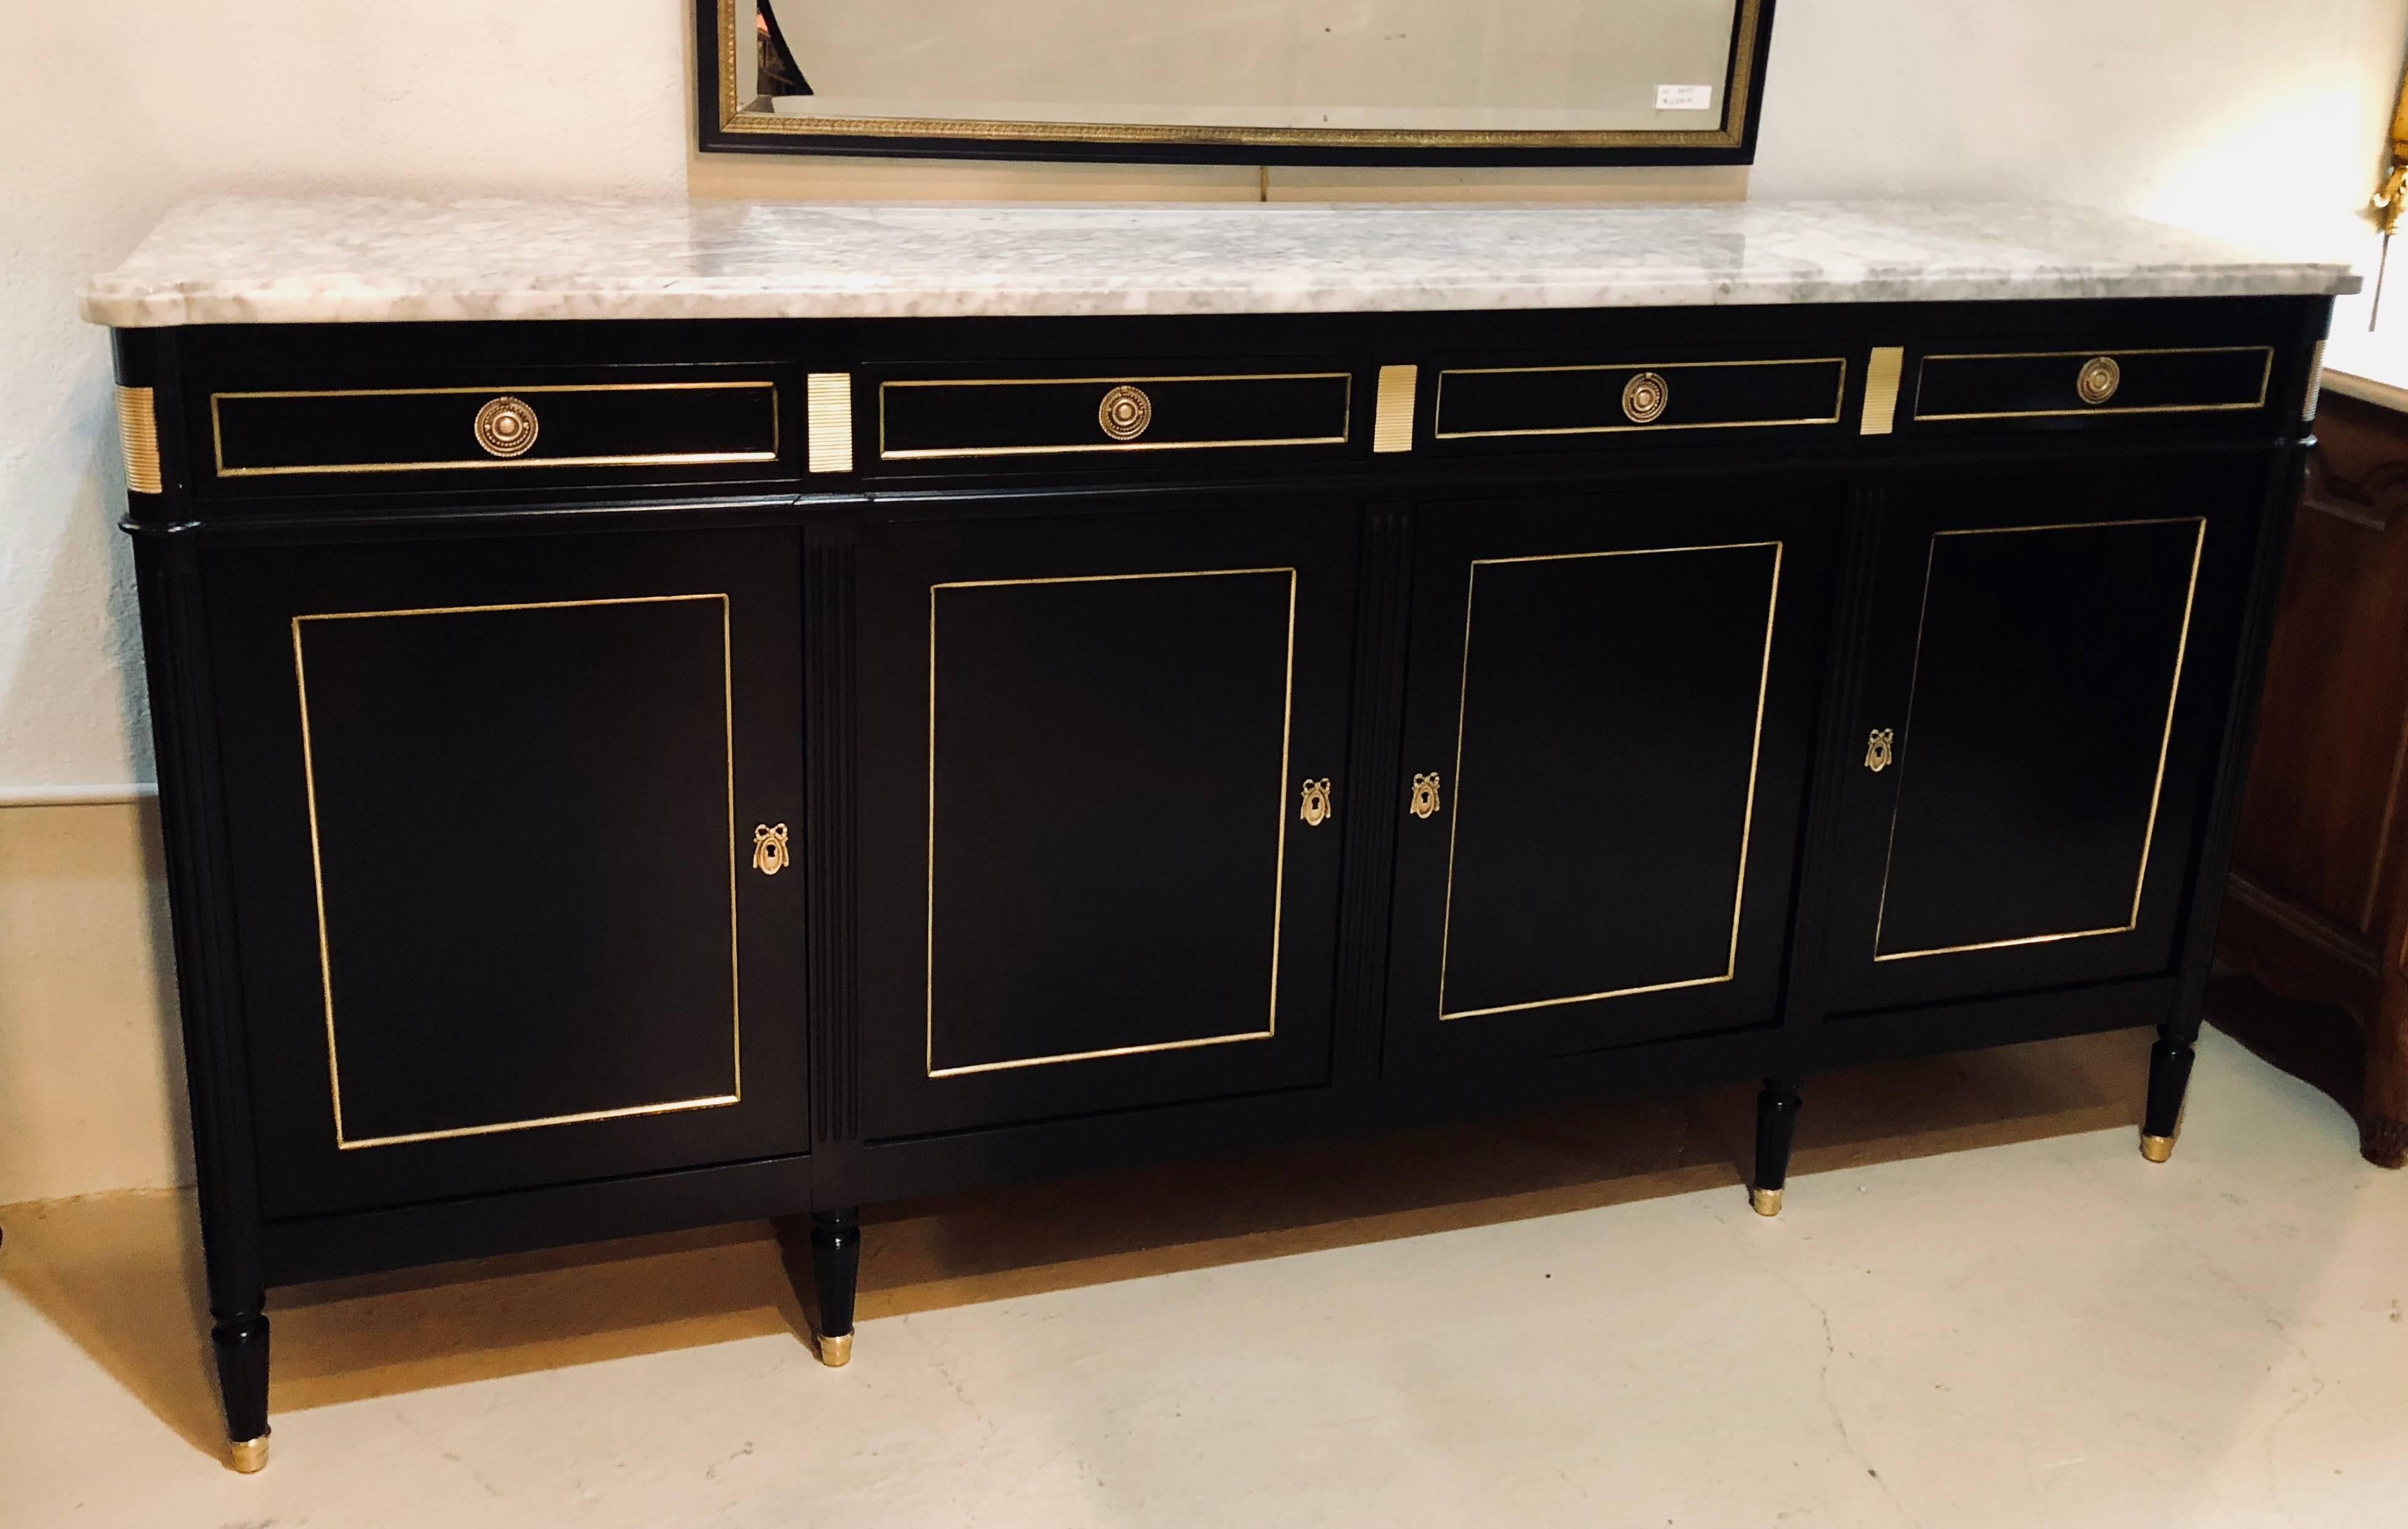 An ebonized Louis XVI style Maison Jansen fashioned sideboard or credenza. In a word, spectacular. This Louis XVI style sideboard has all the glamour and flair one would expect to see from the Hollywood Regency era. The tapering stout legs having